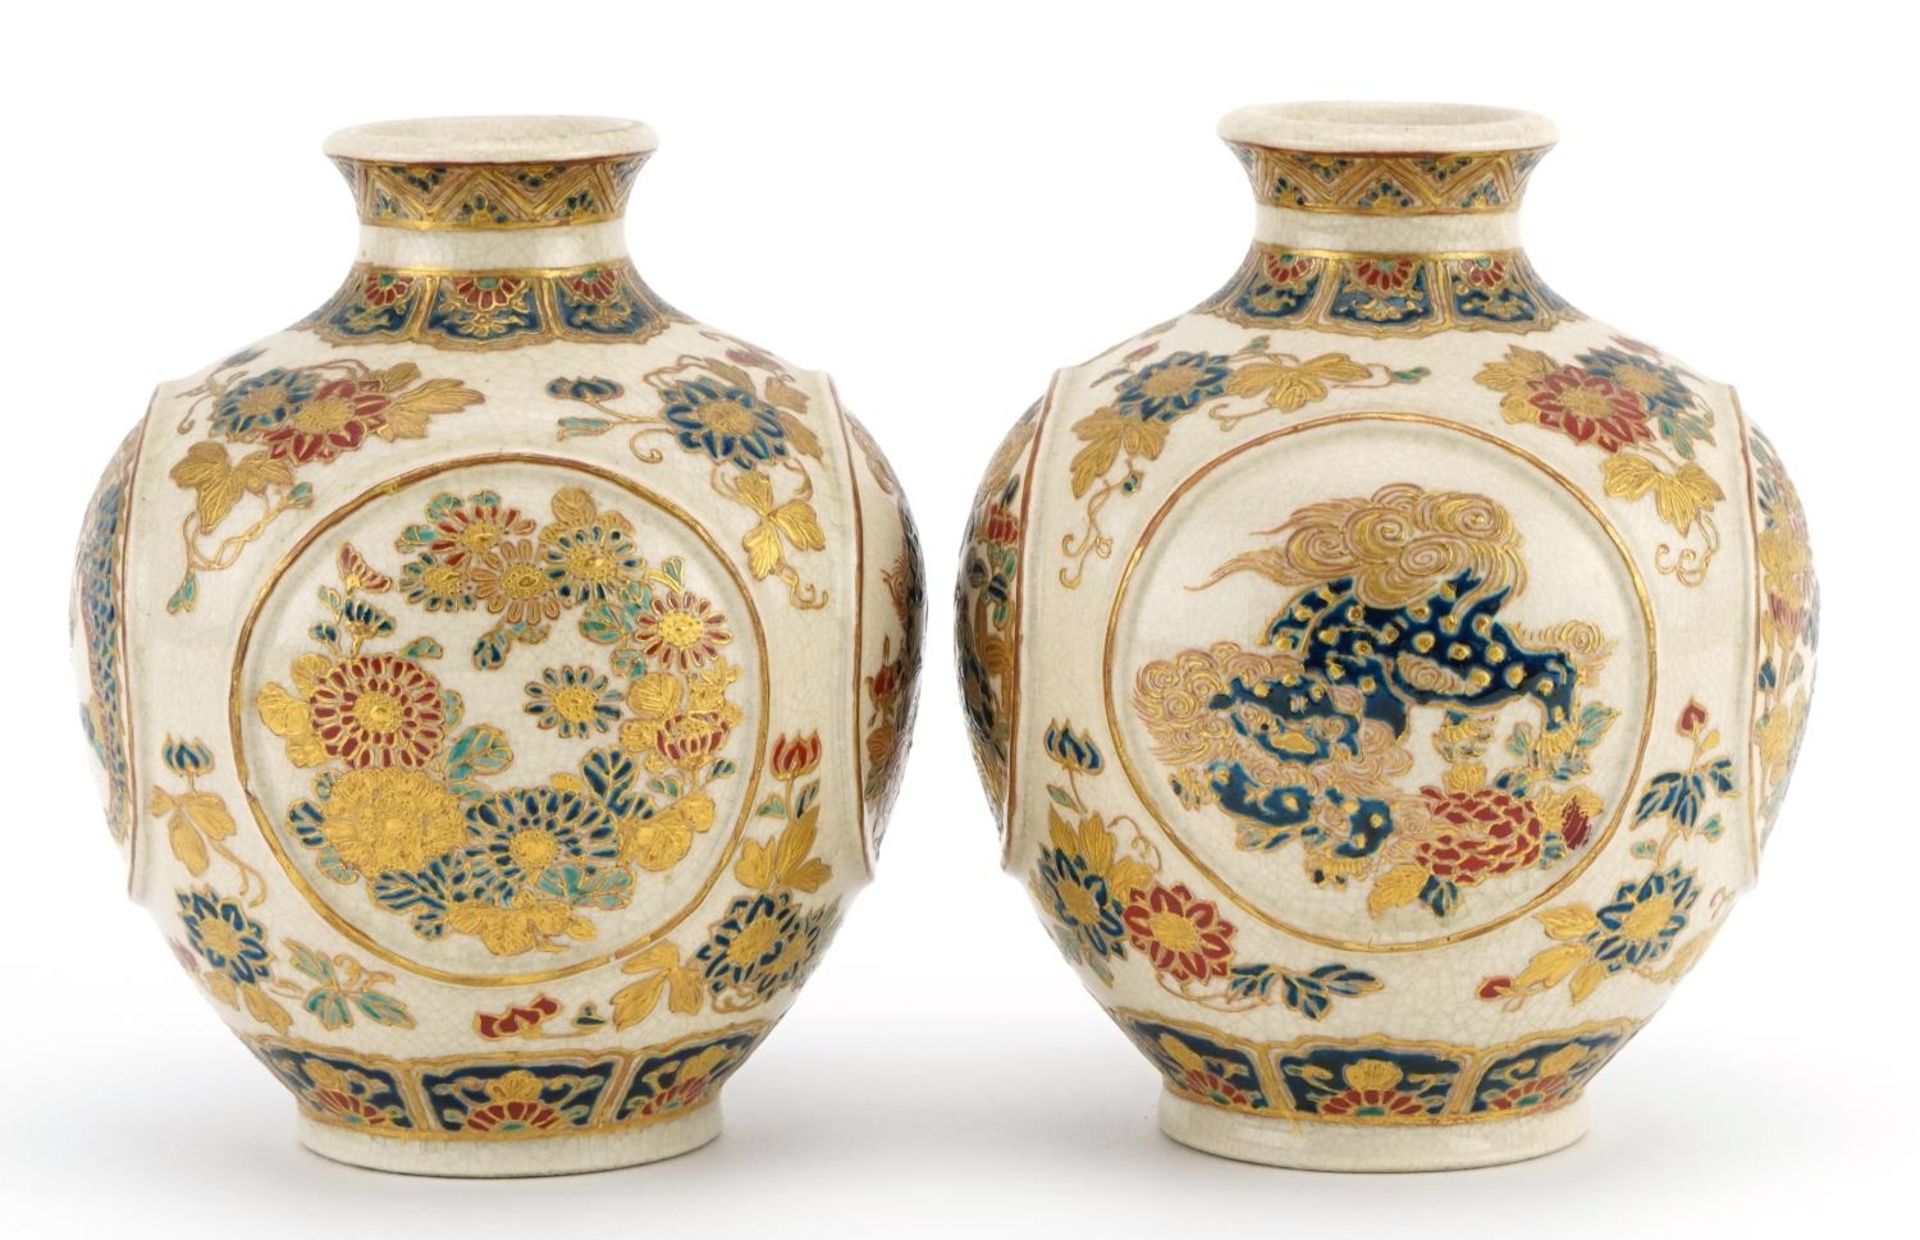 Pair of Japanese Satsuma pottery vases finely gilded with panels of dragons and flowers, character - Image 4 of 6